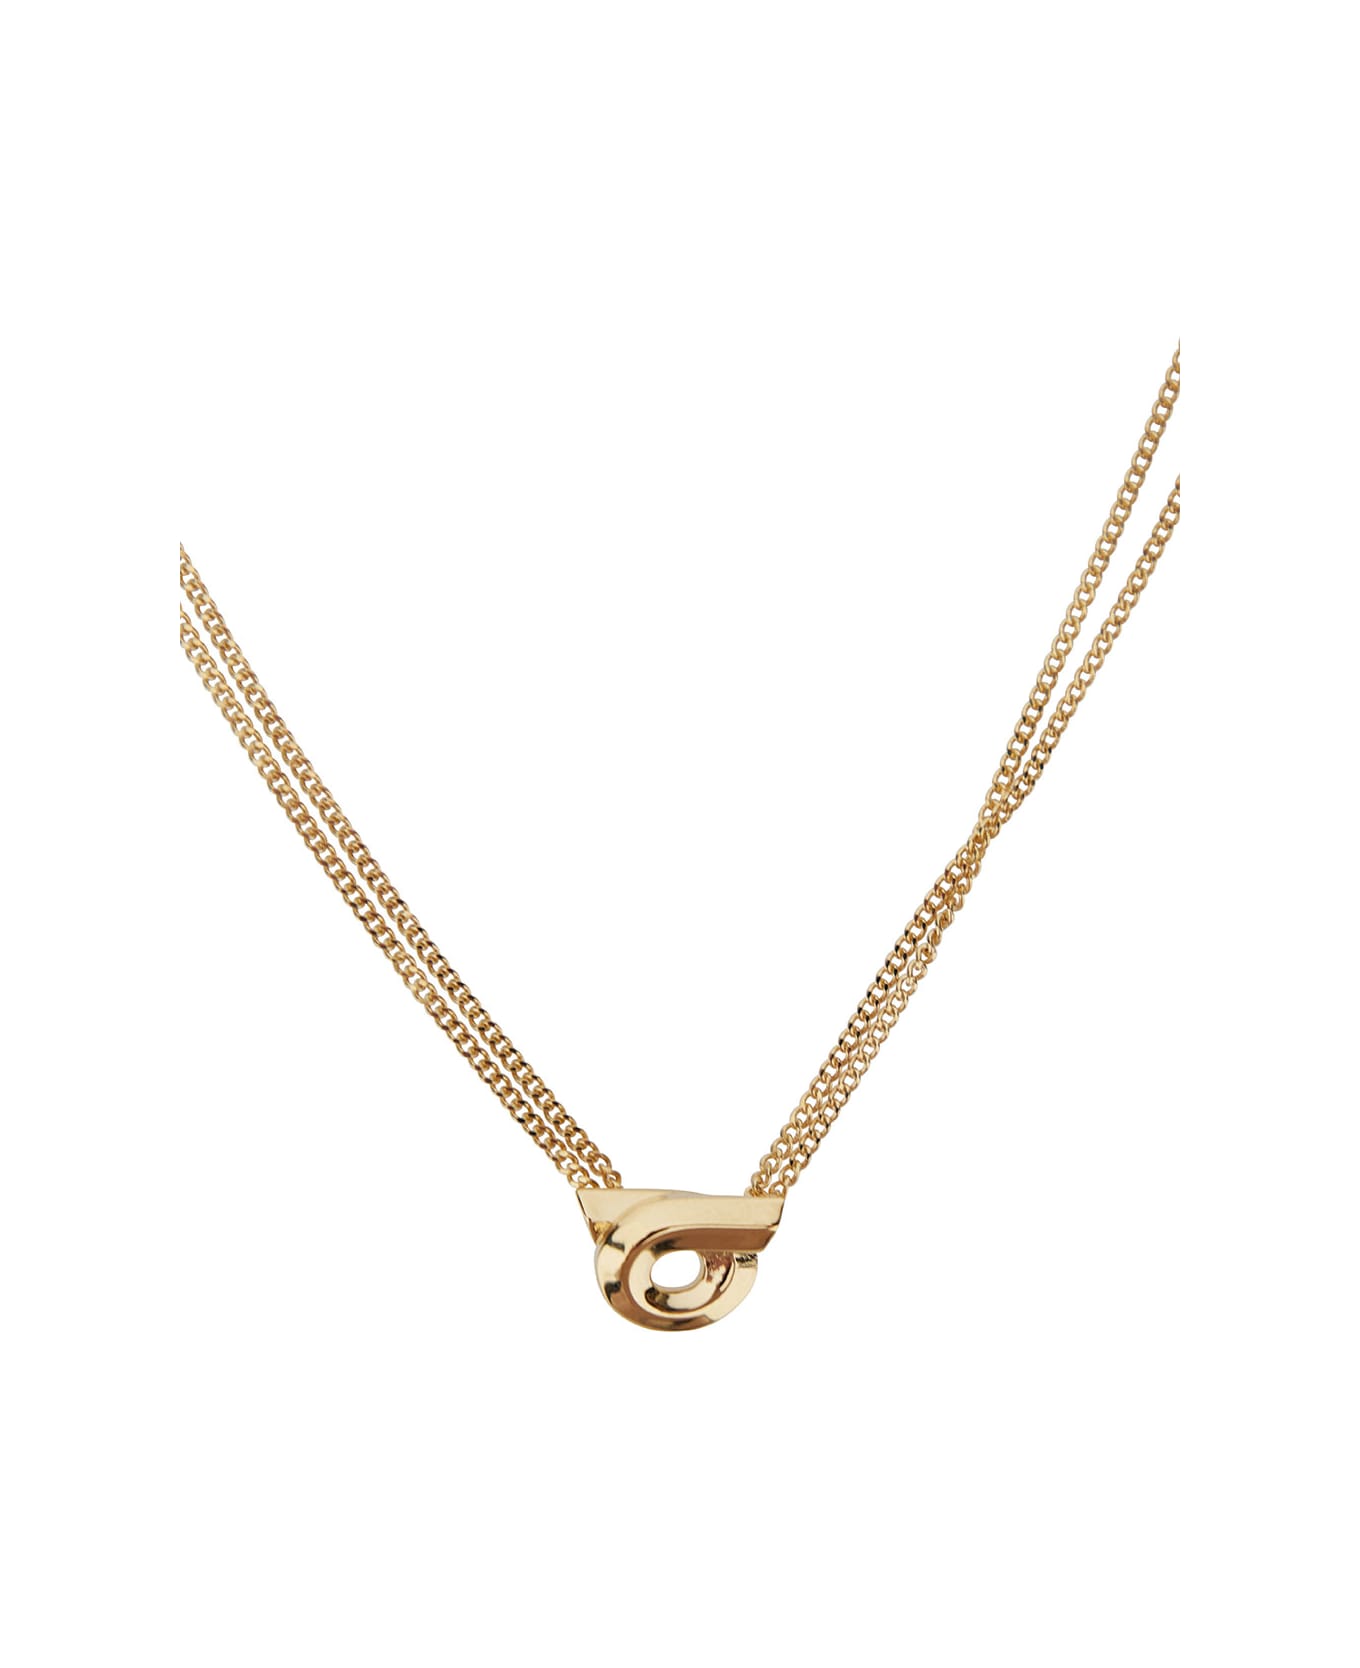 Ferragamo Gold-colored Necklace With Gancini Pendant In Brass Woman - Metallic ネックレス